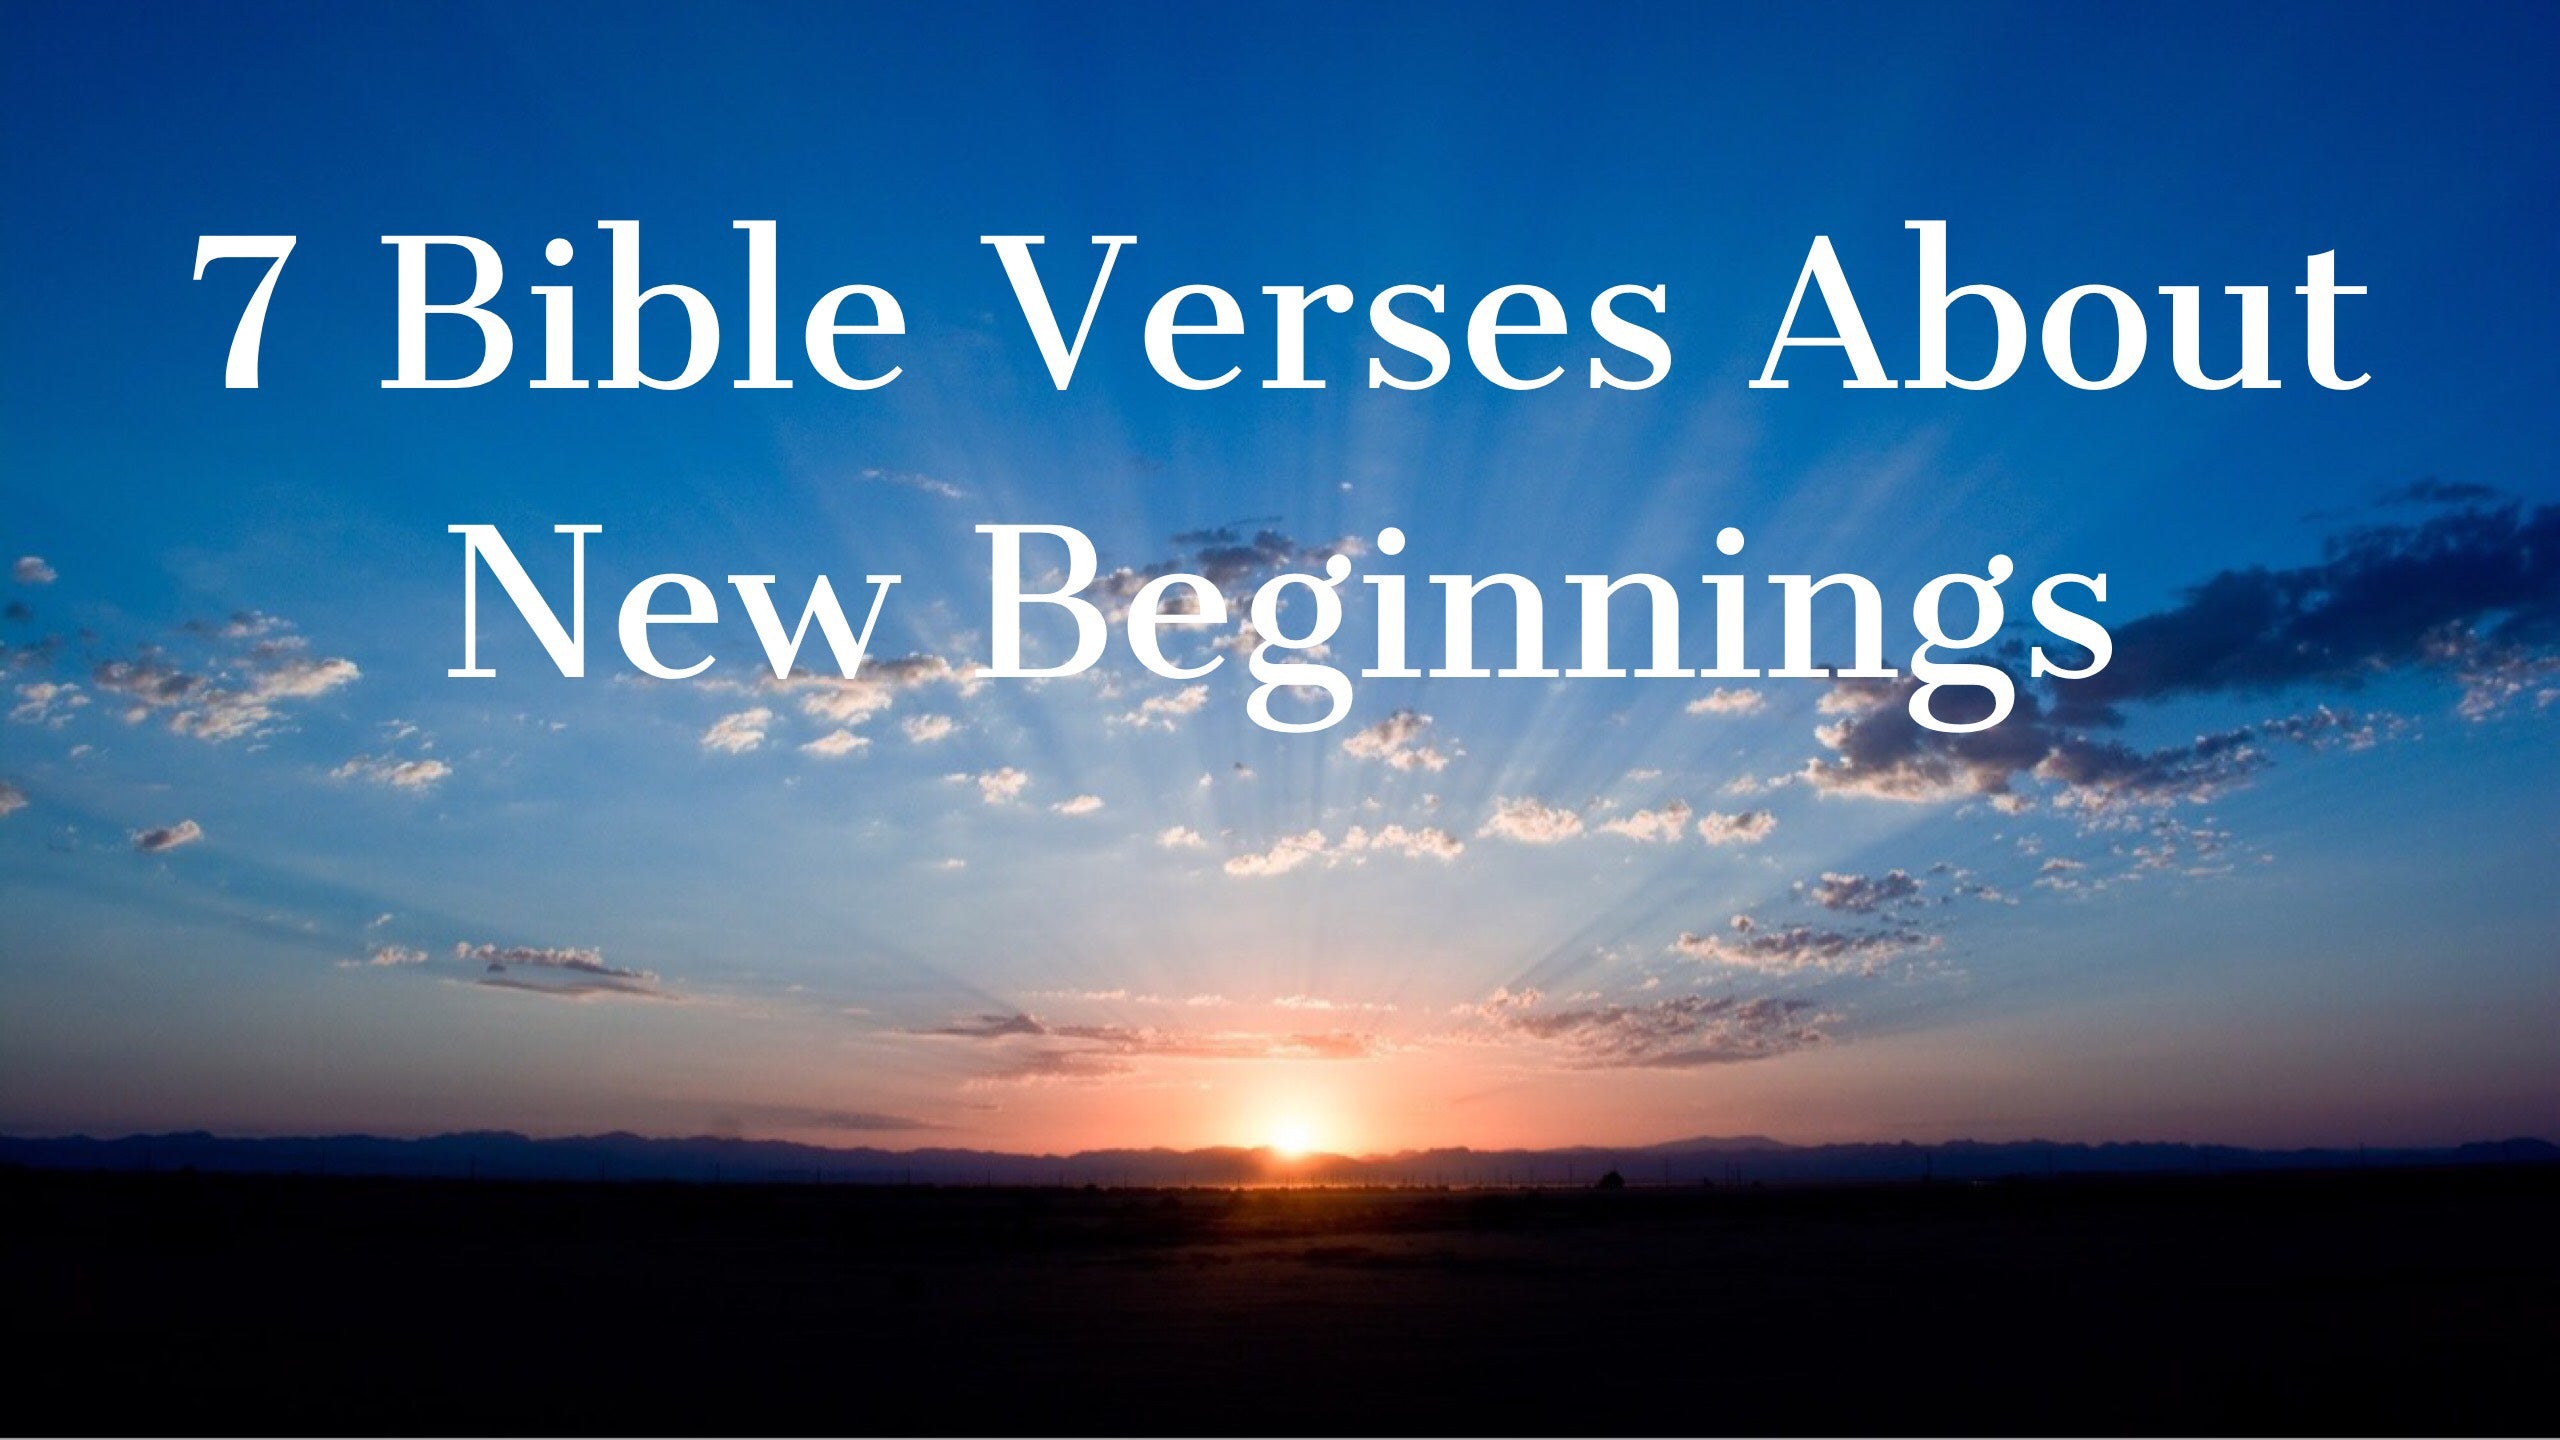 7 Bible Verses About New Beginnings